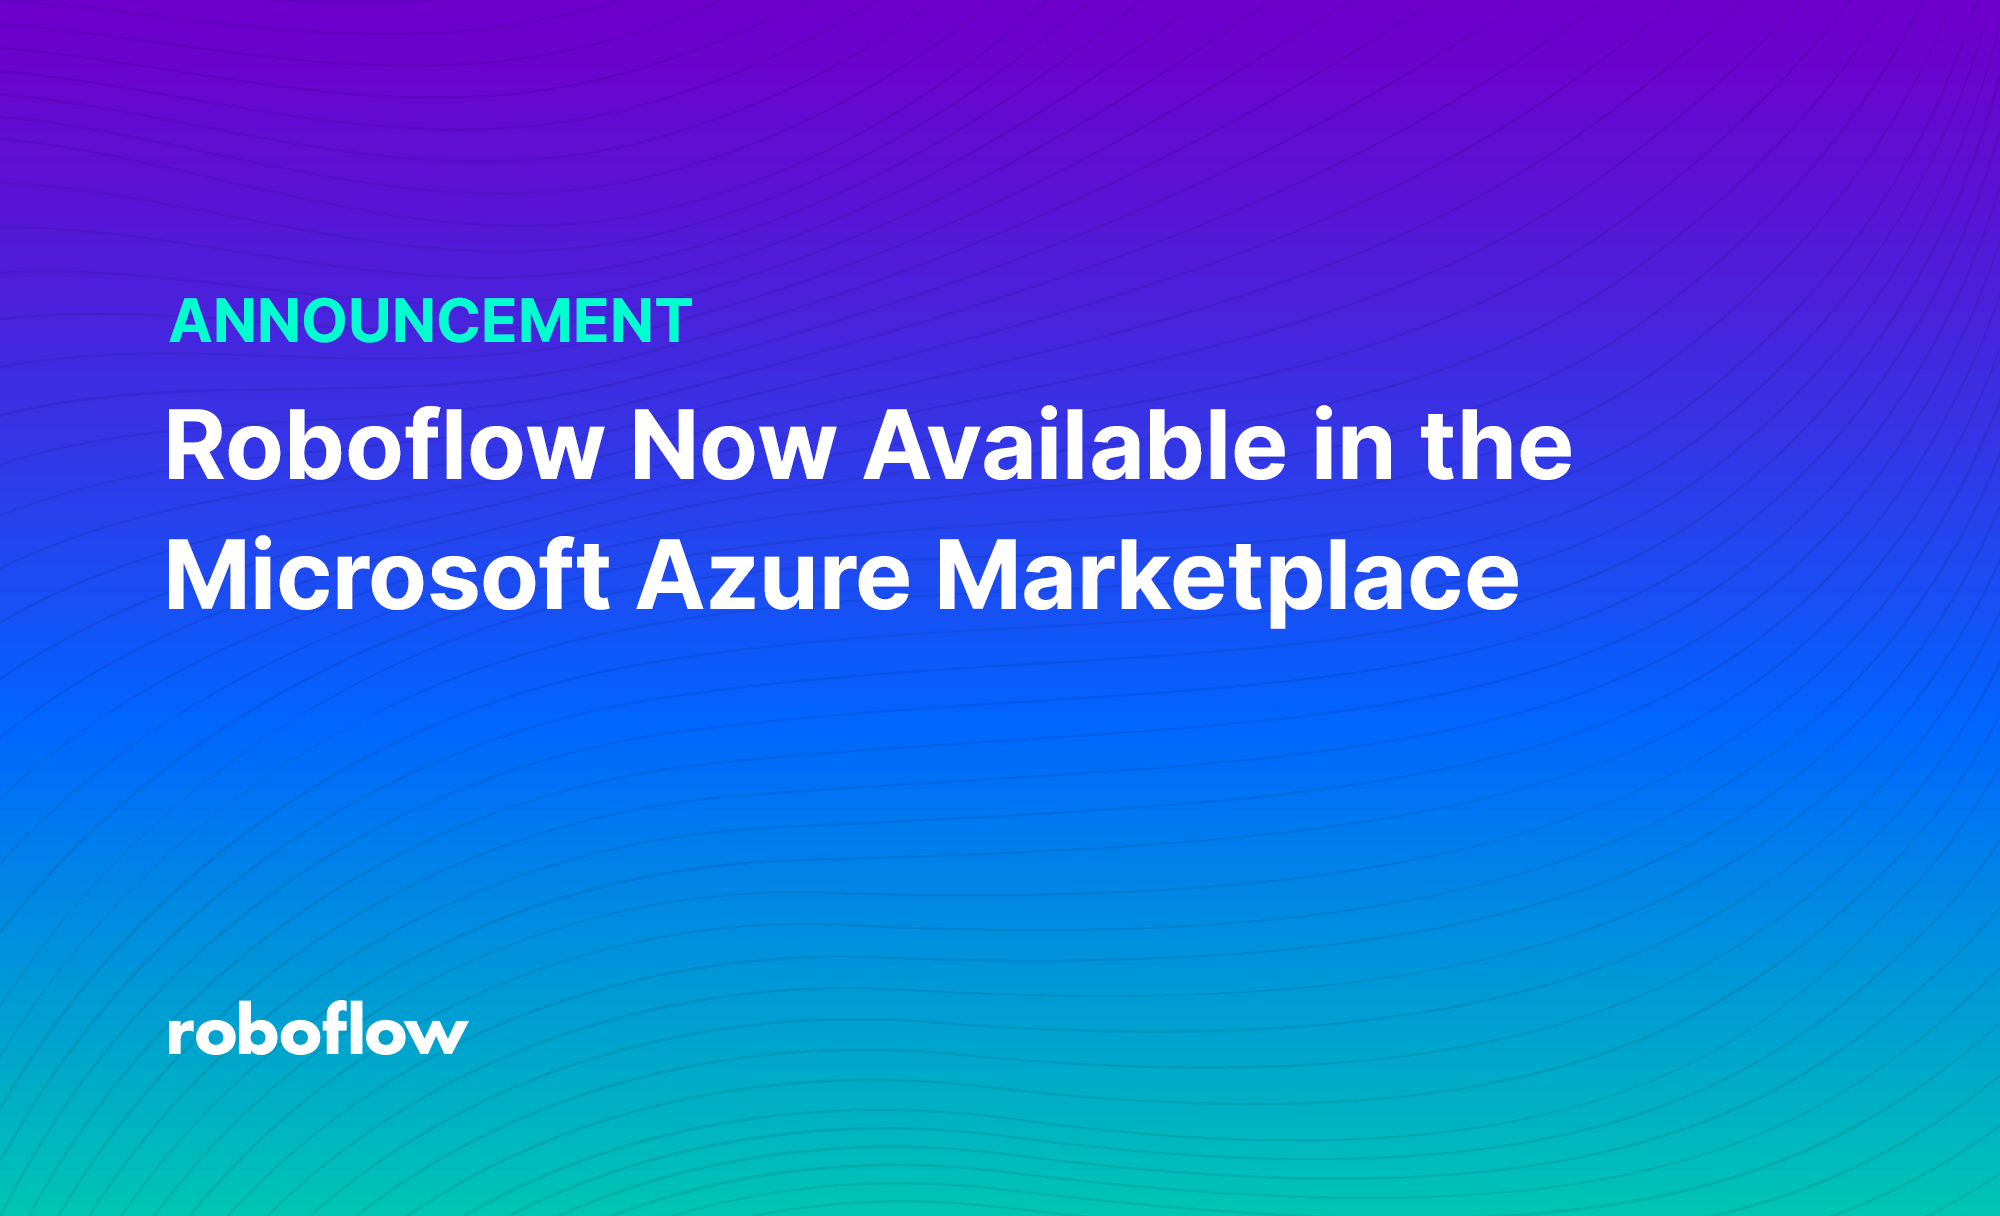 Roboflow Now Available in the Microsoft Azure Marketplace